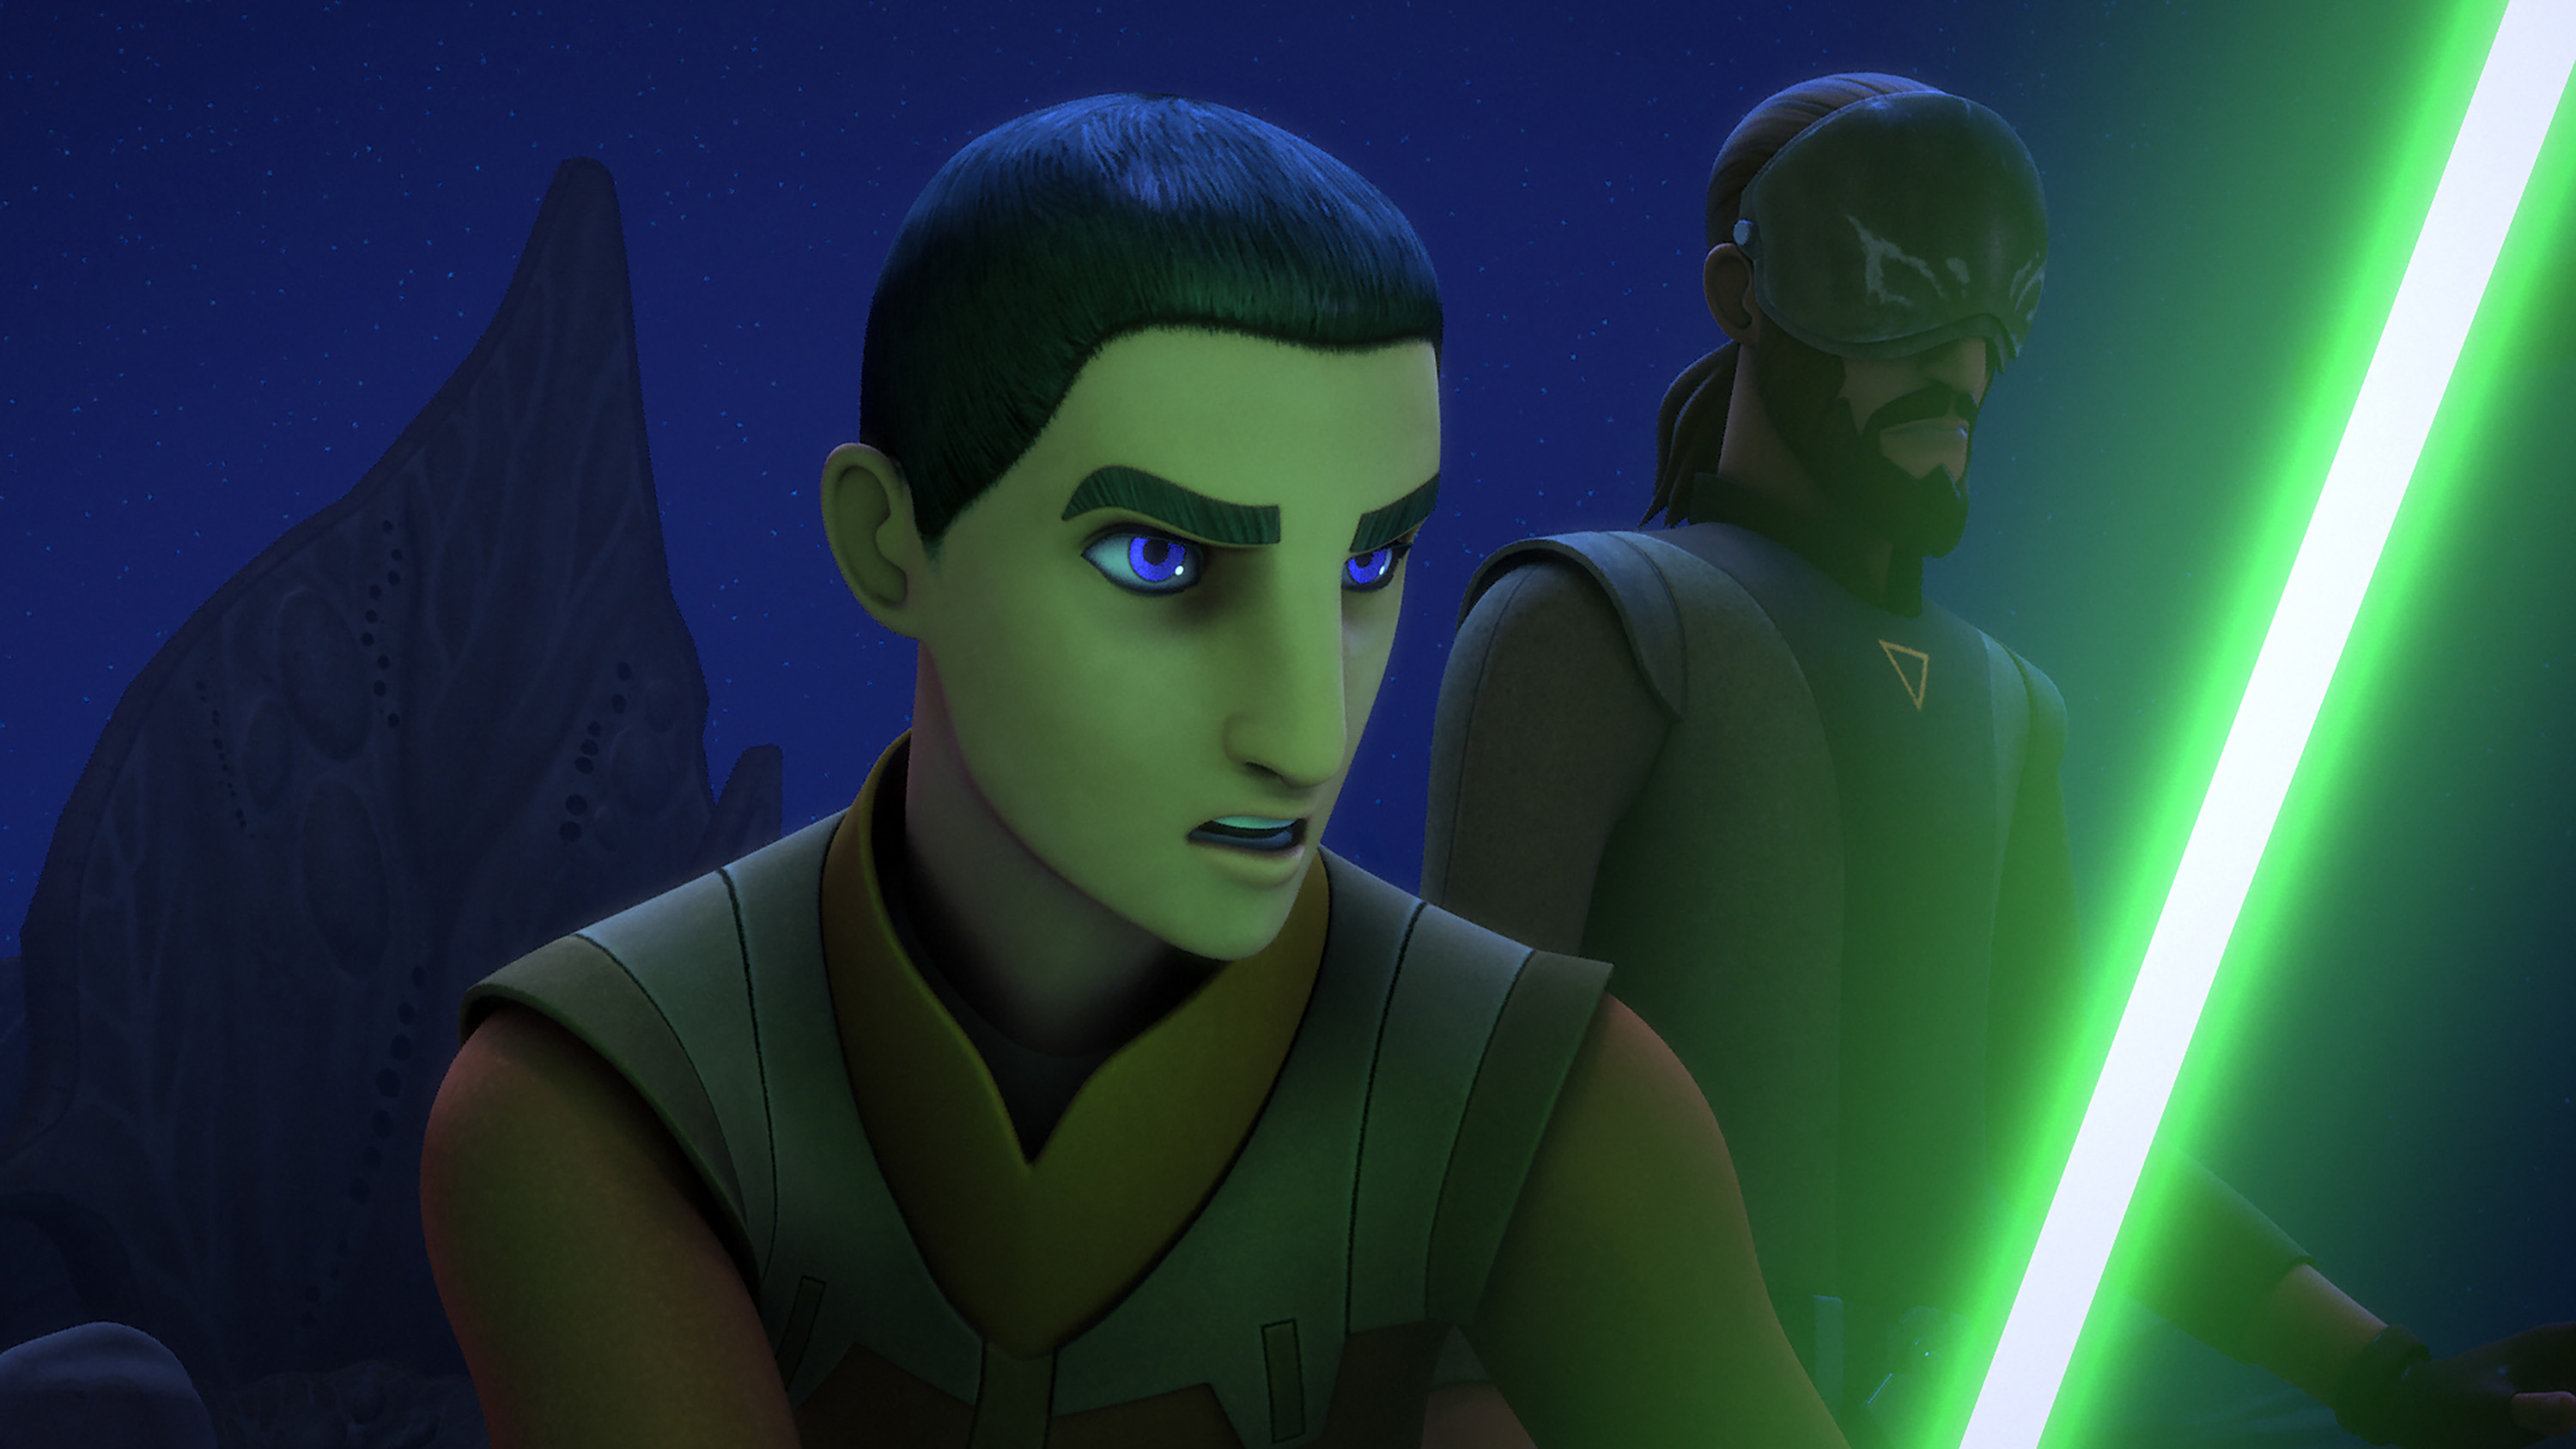 Star Wars Rebels - Ezra Bridger in the Holocrons of Fate. He’s a young man with strong facial features and heavy brows, wearing simple Jedi garb and holding out a green lightsaber.